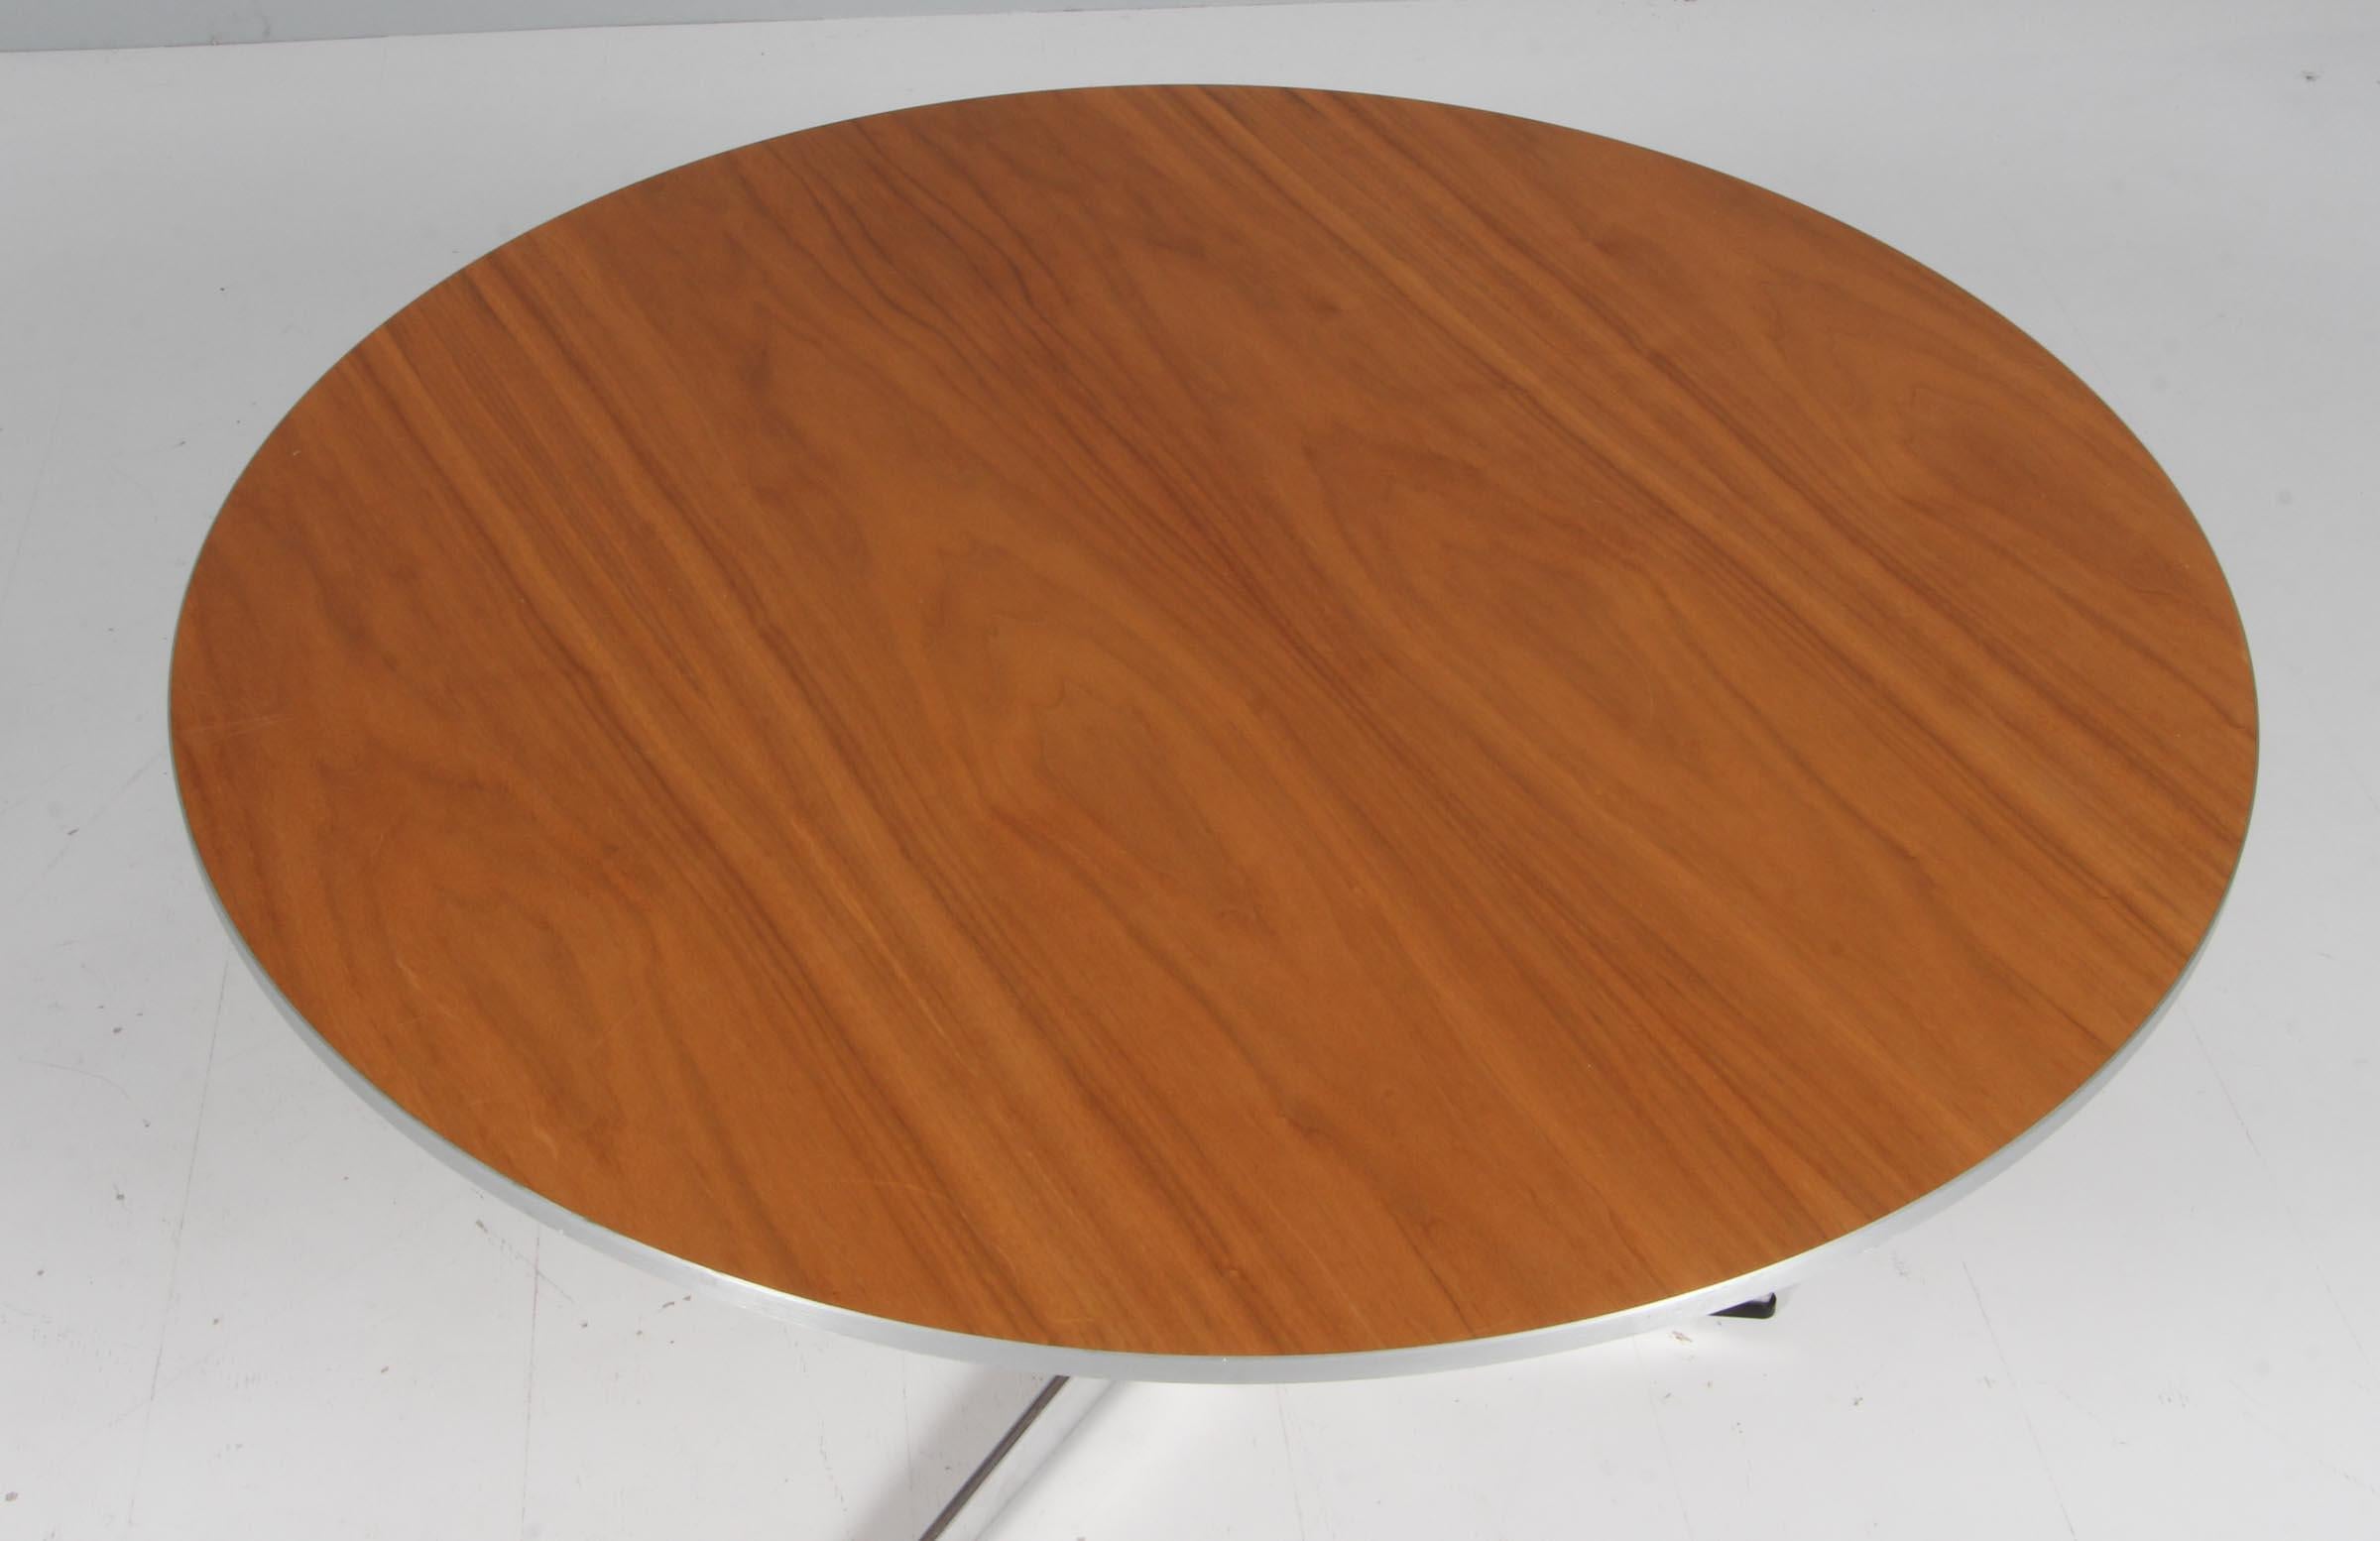 Piet Hein & Arne Jacobsen coffee table with plate of veenered walnut and alu side.

Three star base of aluminium and steel.

Made by Fritz Hansen.